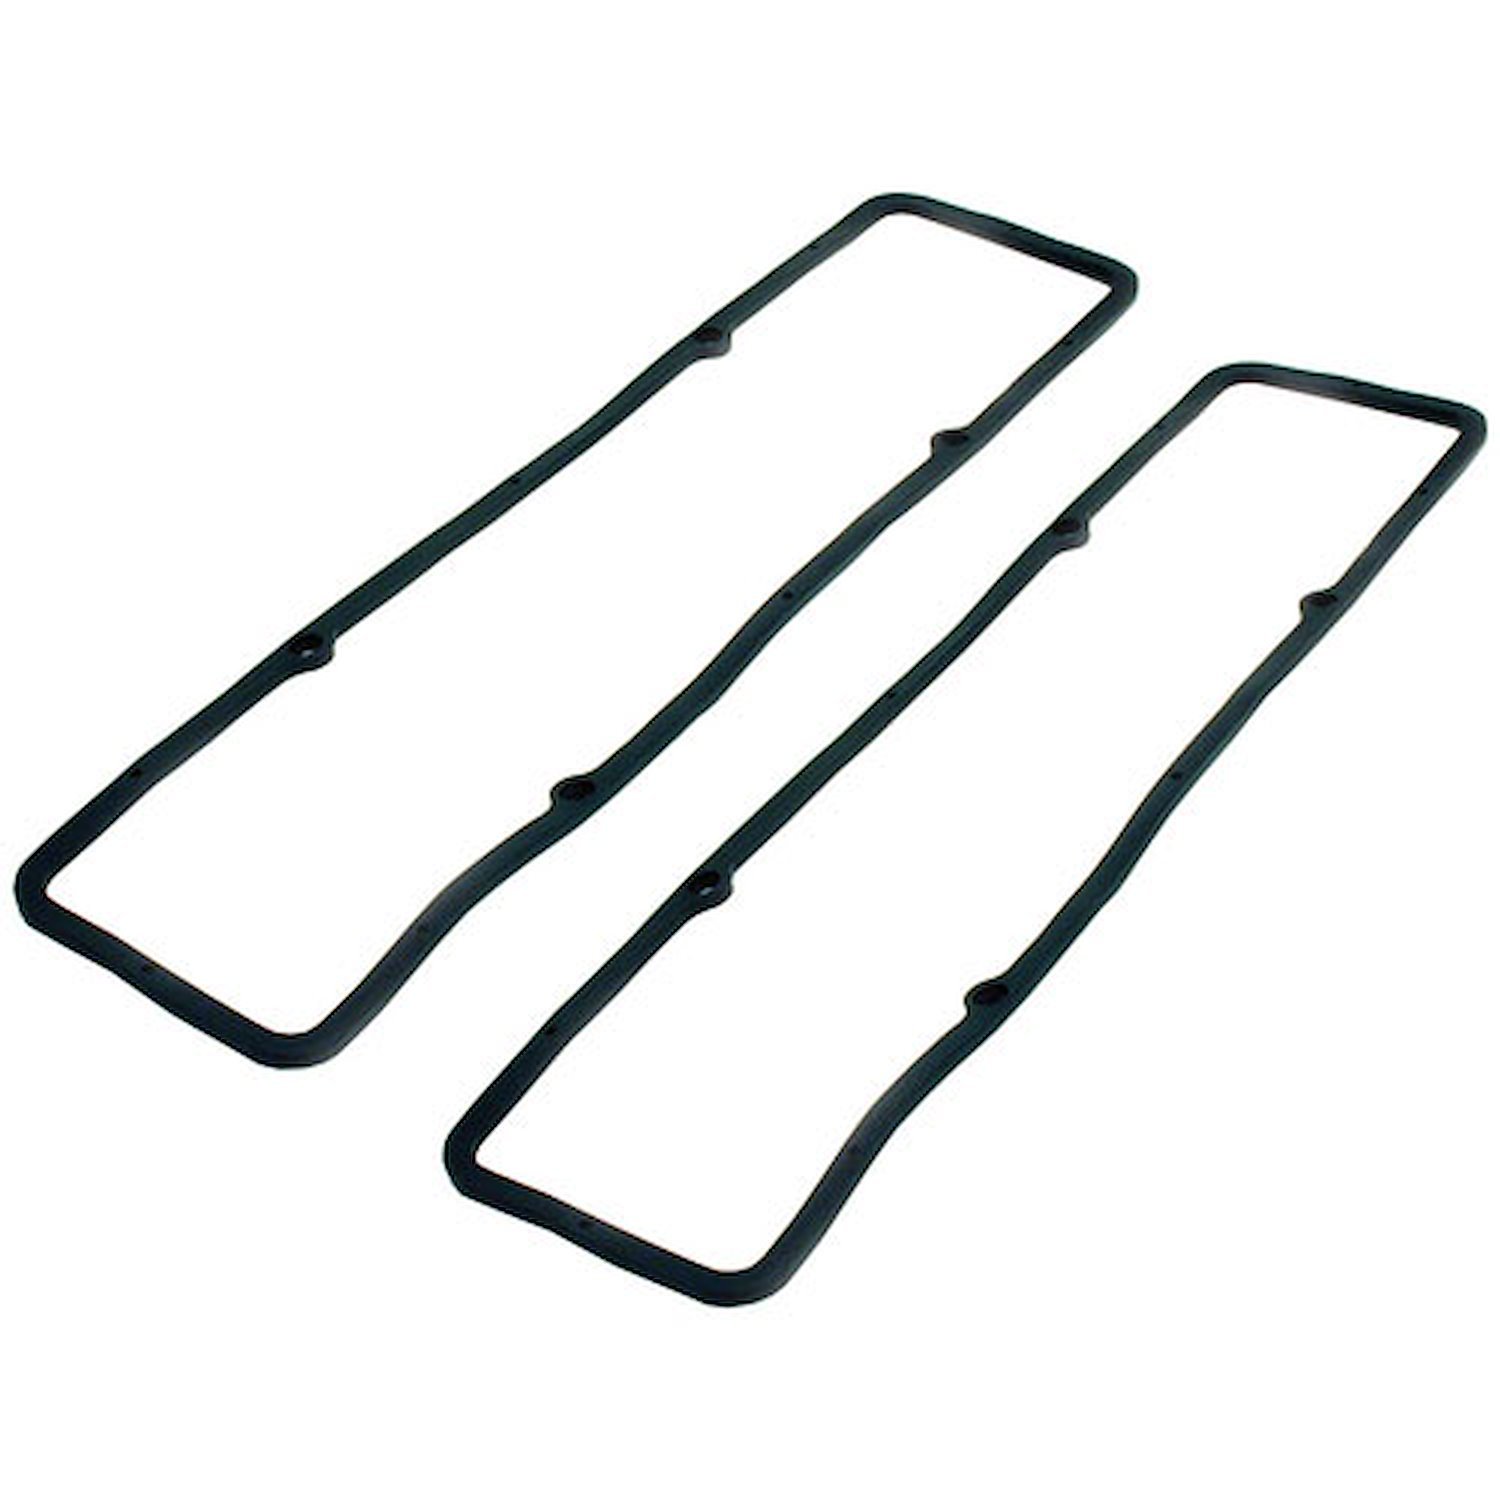 Valve Cover Gaskets Small Block Chevy 265-400